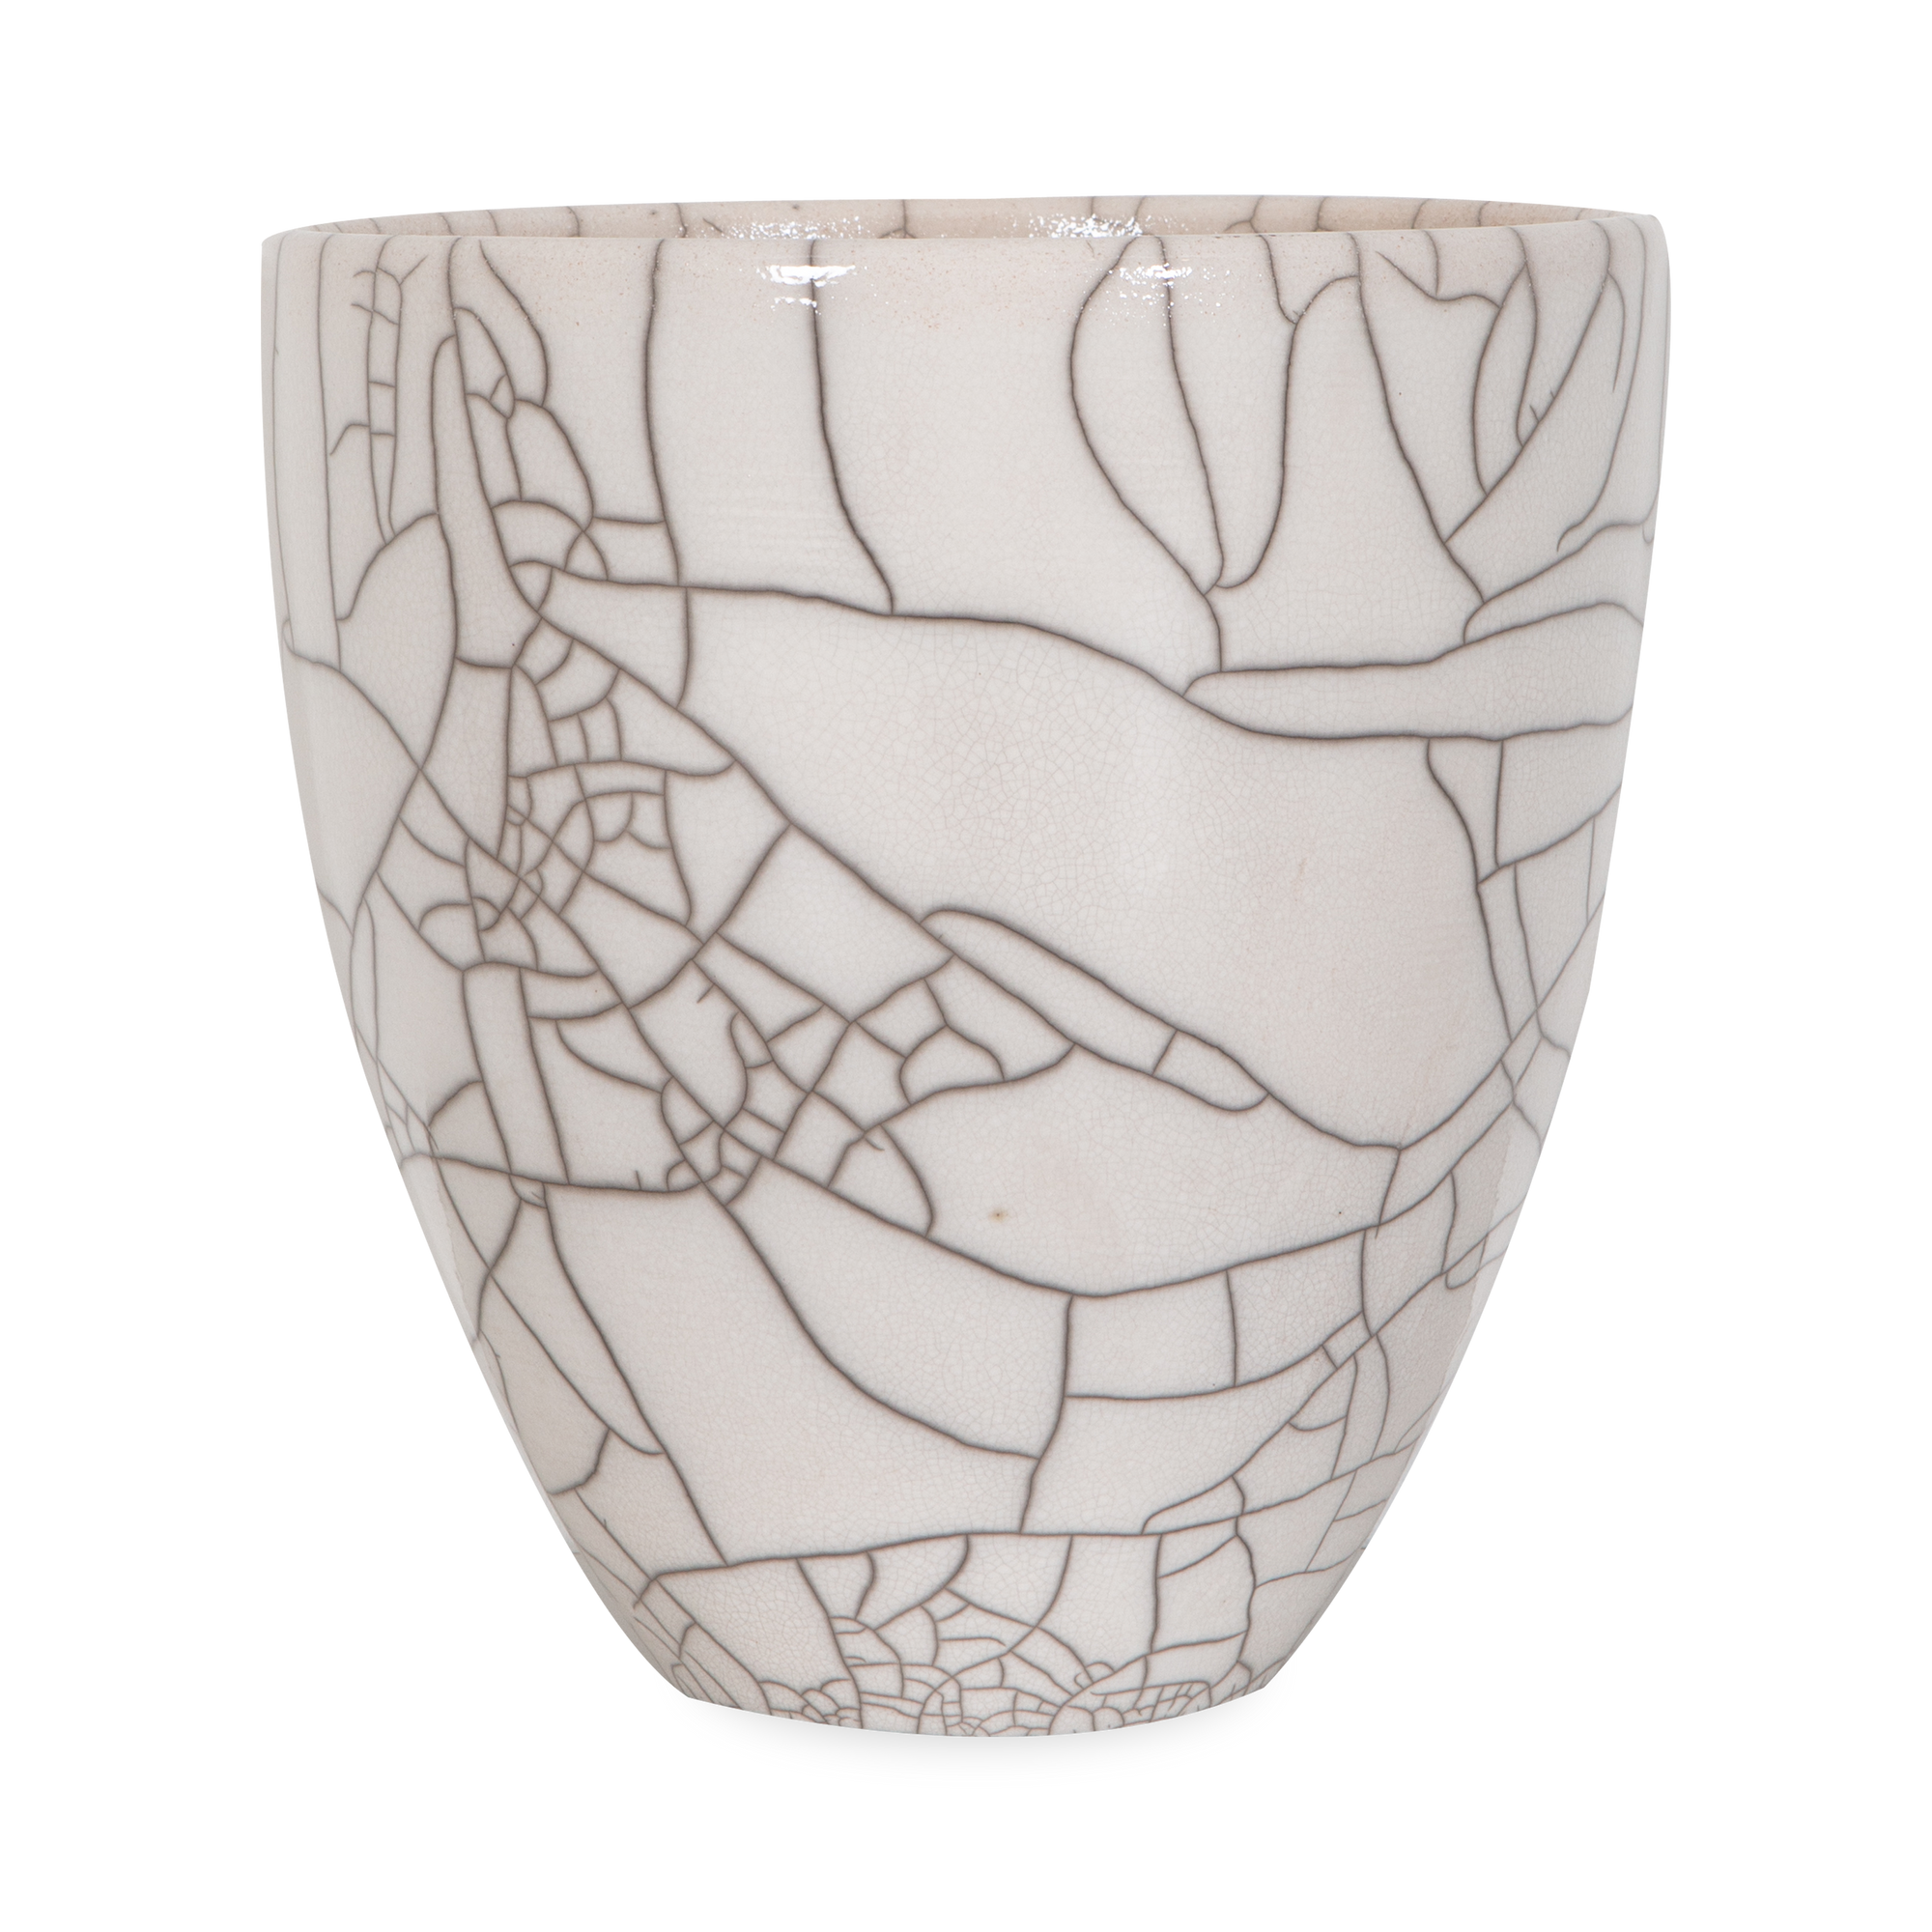 The Raku Planter features a white crackle finish, which is created due to the highly reactive Raku glaze and a low-firing process that involves controlling temperature and deprivin